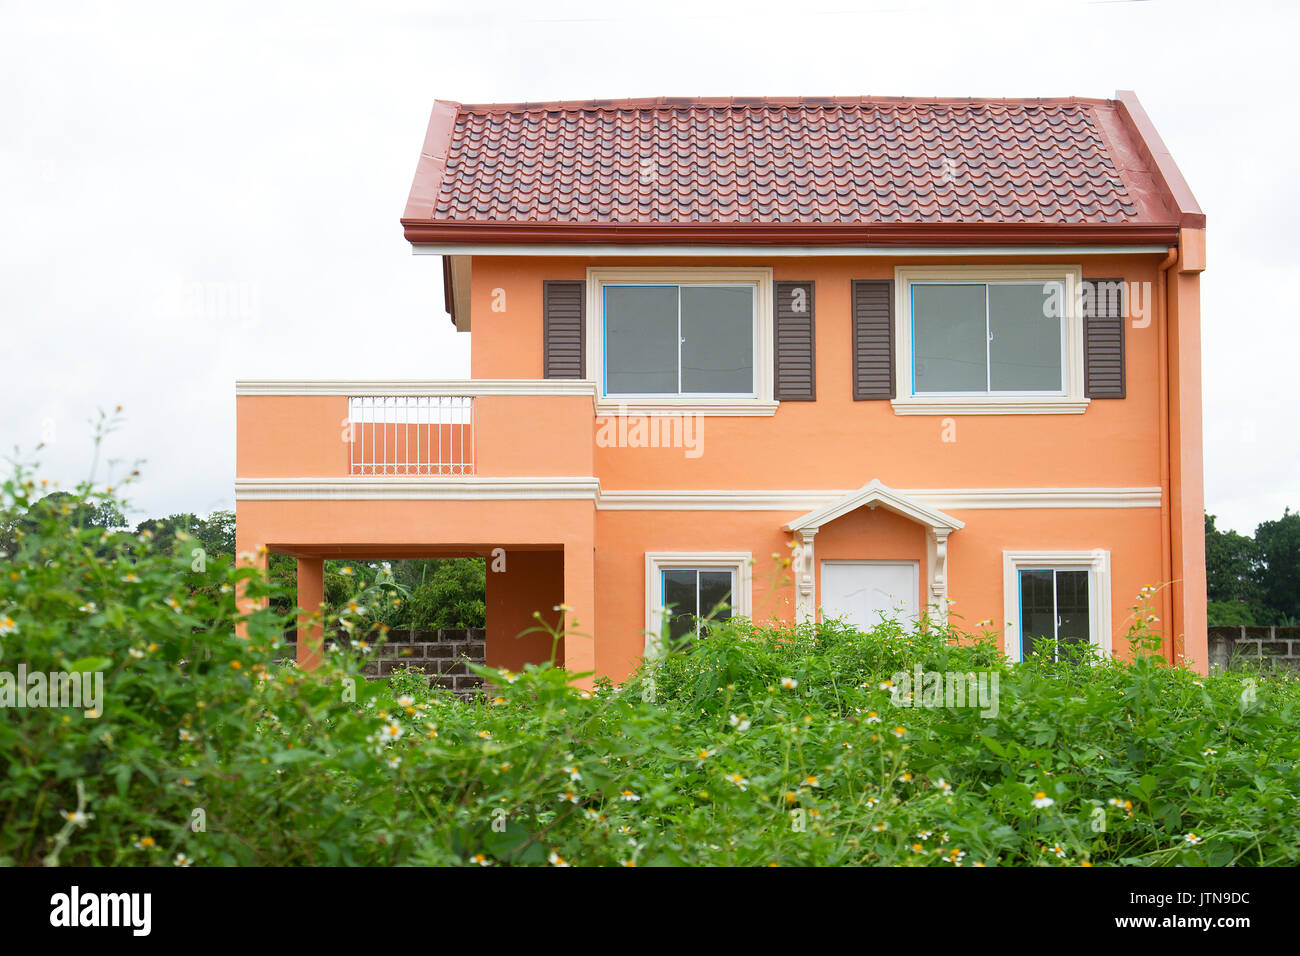 Orange color modern italian house - with grassy foreground Stock Photo